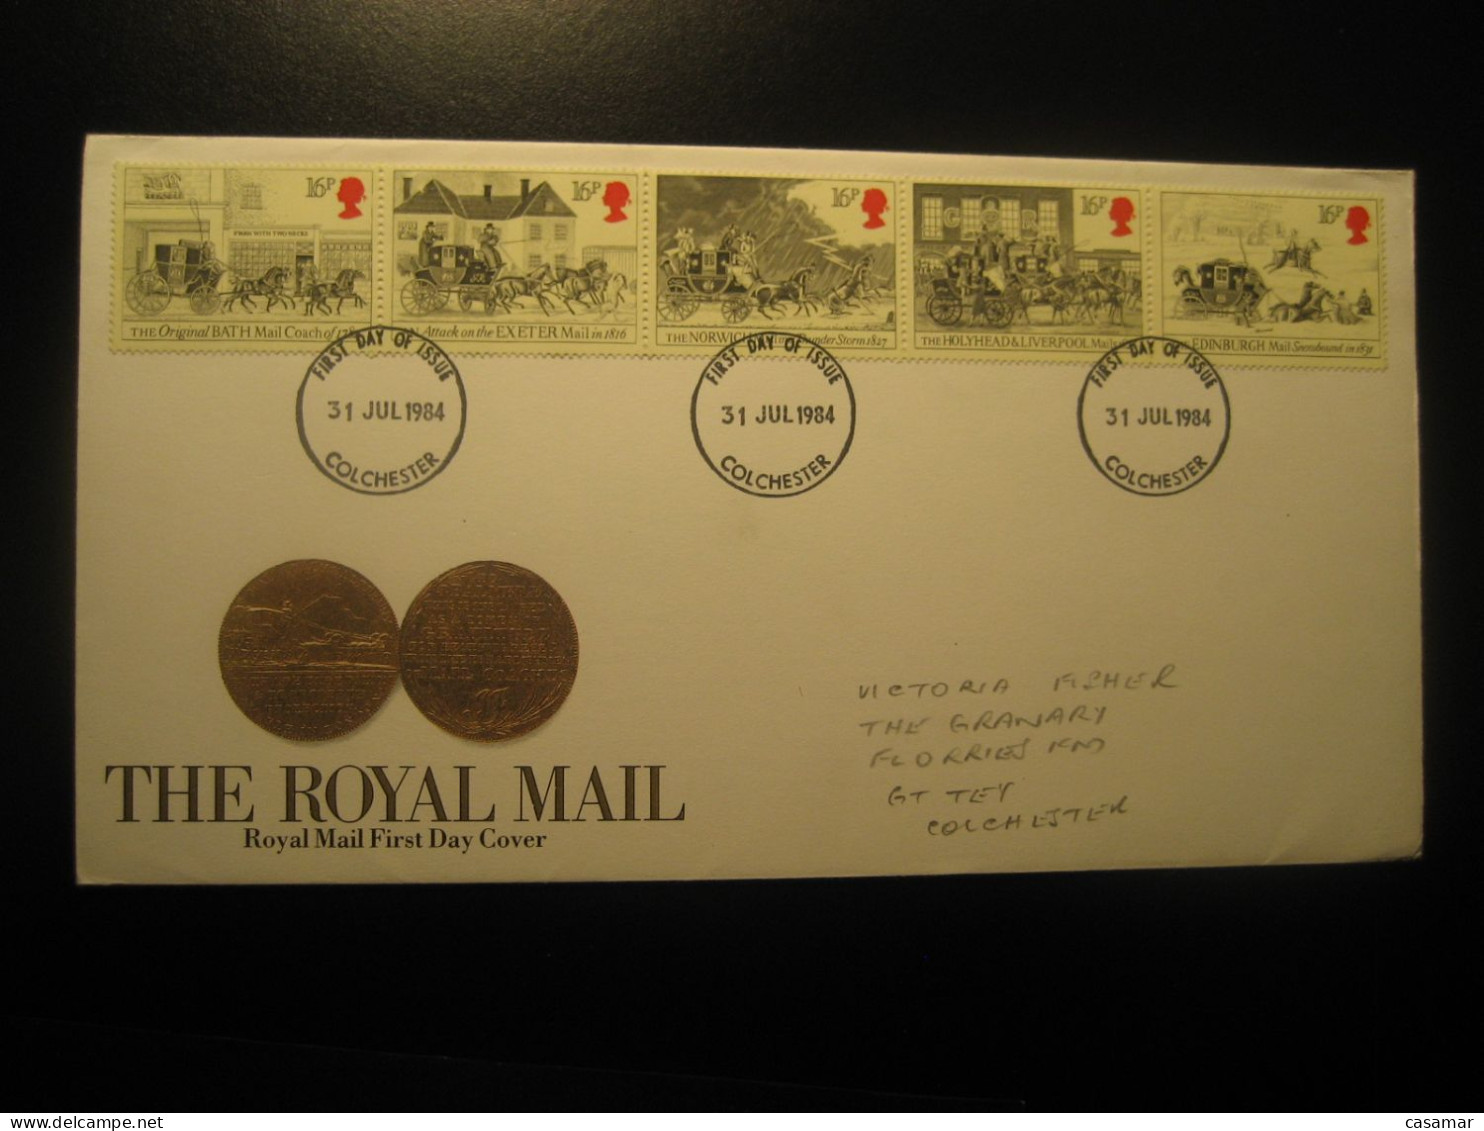 COLCHESTER 1984 Royal Mail Coach Stage Coach Stagecoach FDC Cacnel Cover ENGLAND - Postkoetsen